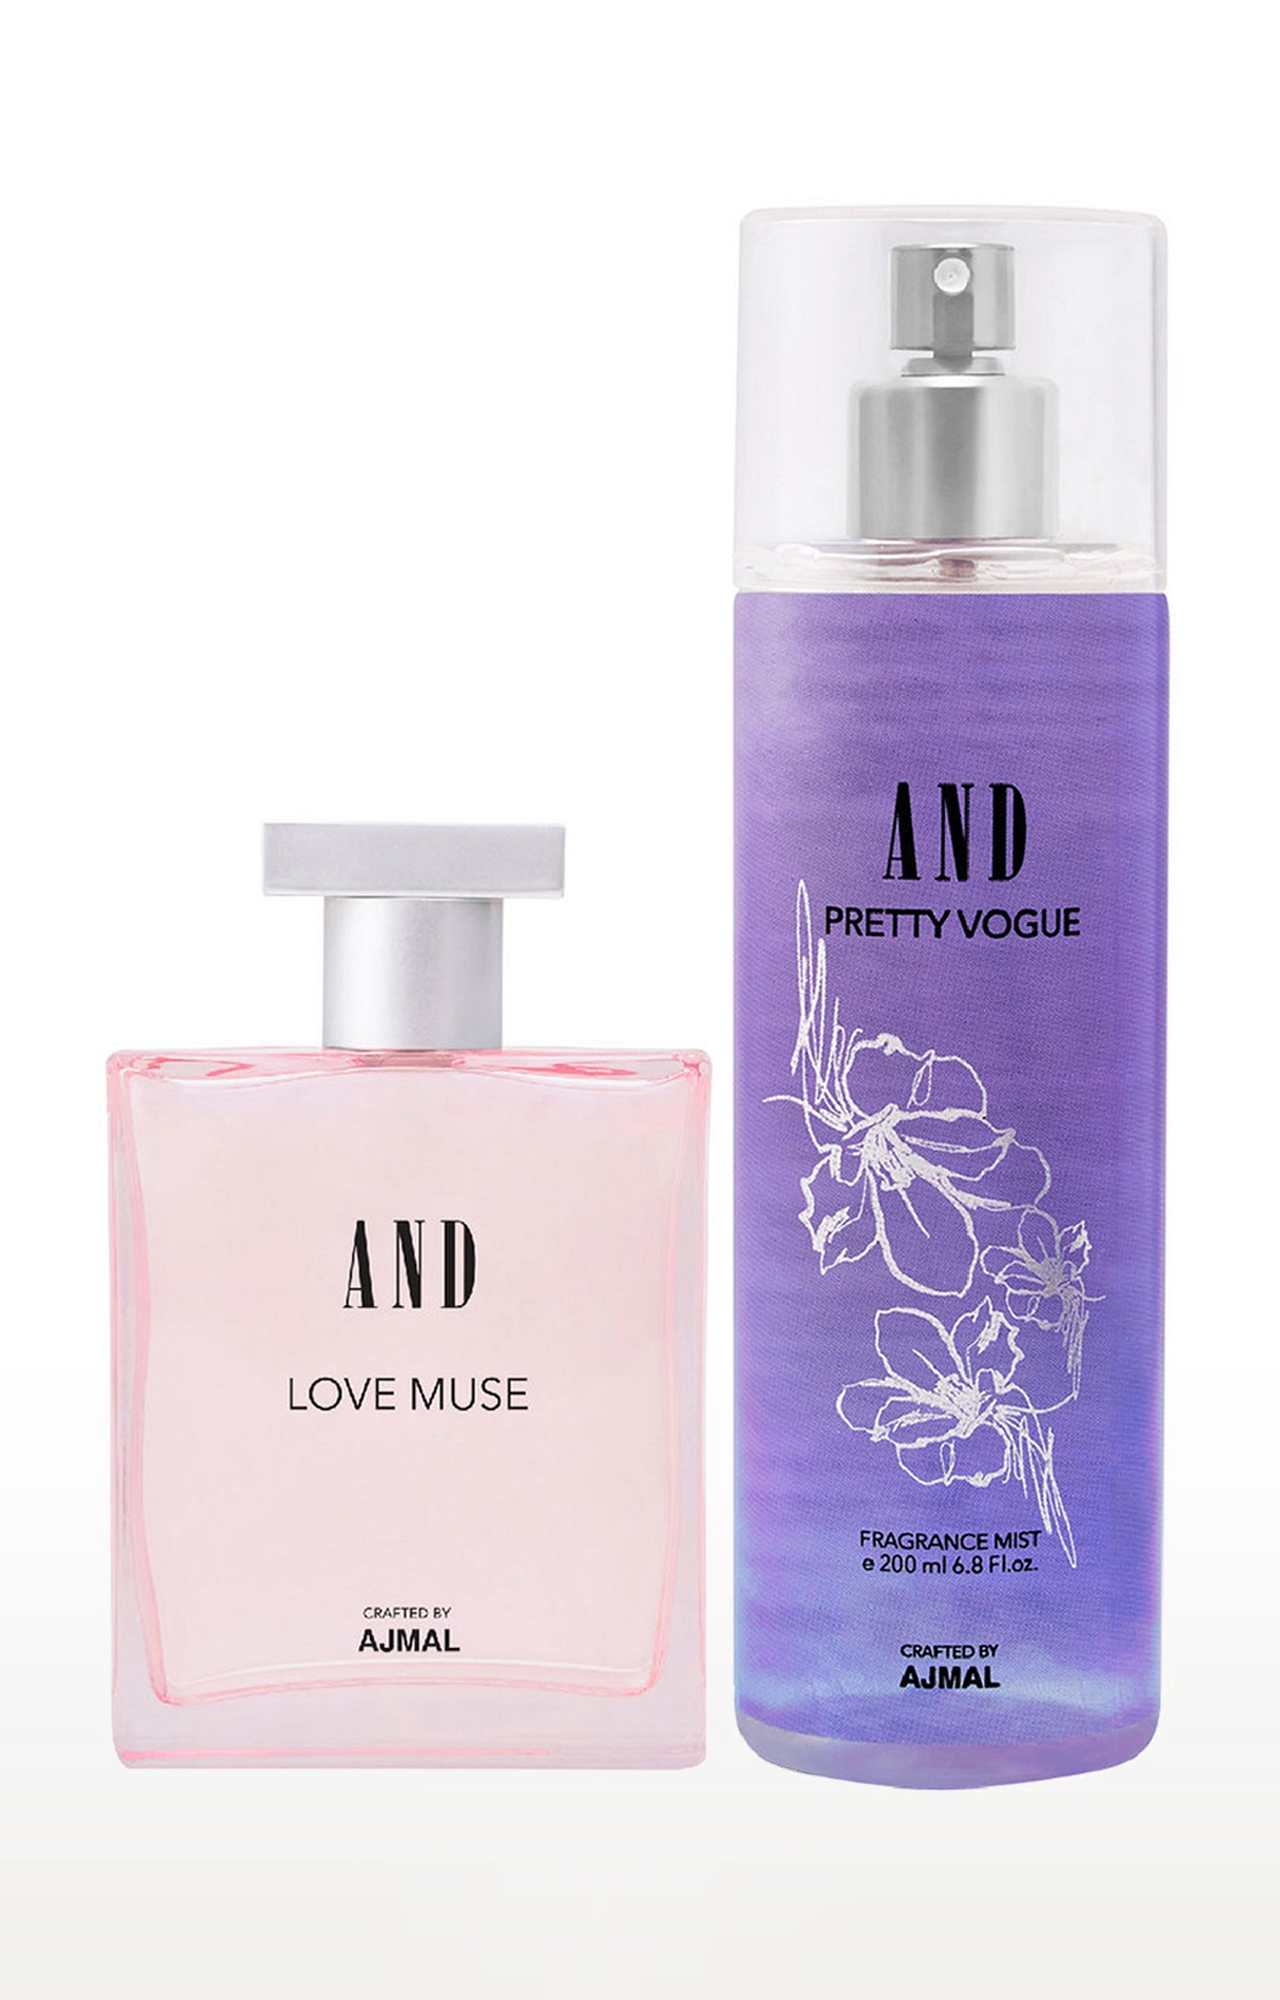 AND Love Muse Eau De Parfum 50ML & Pretty Vogue Body Mist 200ML Pack of 2 for Women Crafted by Ajmal 